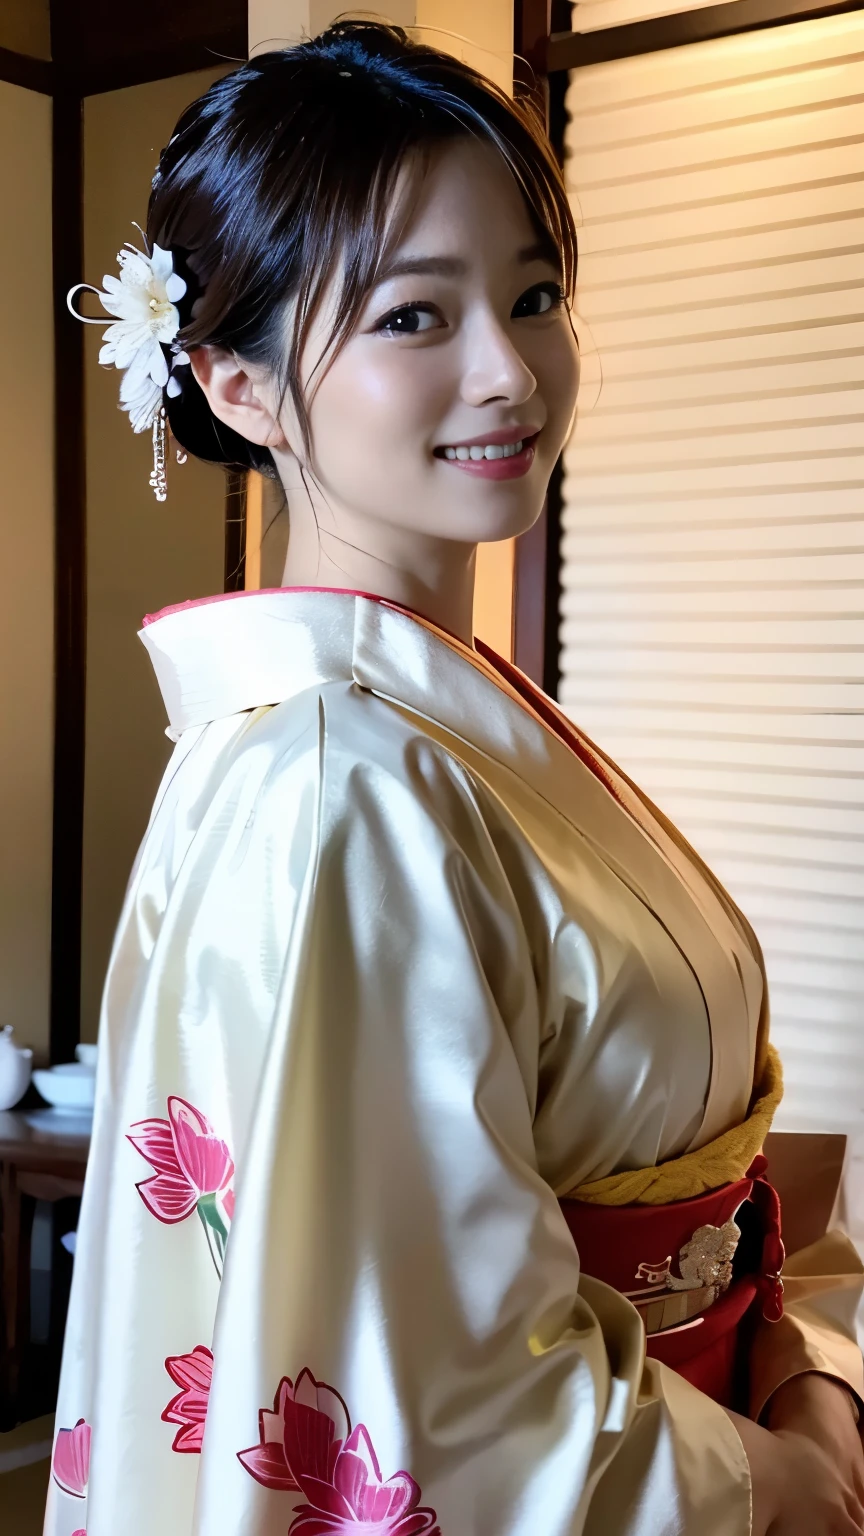 (((Carefully drawn with perfect anatomy))),Photo session in a traditional Japanese room at a long-established luxury inn,The collar of the kimono is pulled back, revealing the white nape of the neck.,A full-body shot of a woman standing with her head tilted from behind, smiling elegantly, with the background in the background taken with a wide-angle lens.,(((Beautiful black hair arranged in a Japanese hairstyle, Date Hyogo, with many hairpins on her head:1.3))),One girl,one personで,A dignified smile,Eyes that capture the light of the chestnut color,Black Hair,hair ornaments,An elegant posture with knees together,Furisode kimono,kimono,Red lips,compensate,tassel,rope,eye shadow,Purple kimono,Nishijin obi,Many bamboo hairpins,Masterpiece,Ulzan 6500,(Realistic photo),masterpiece,High resolution,Highlights the best light and shadow contrast,Main Character,Very high depth of field,soft delicate beautiful attractive 顔, Beautiful Edge Oiran_woman, a woman in a kimono posing for a picture,Perfect Edge Oiran_body,edge Oiran_Hairstyle,(Saiharu Body),(Tabletop,high quality,最high quality),(Delicate eyes and face),Ray Tracing,Highly detailed CG Unity 4k wallpaper,one person,Best image quality,Excellent detail,超A high resolution,Realistic:1.4),Attention to detail,Beauty condensed in 1girl,Beautiful brown hair,Beautiful face with a delicate and high nose,Long limbs like a model,Tight waist,High nose,Clear chestnut eyes,Glossy lips, 